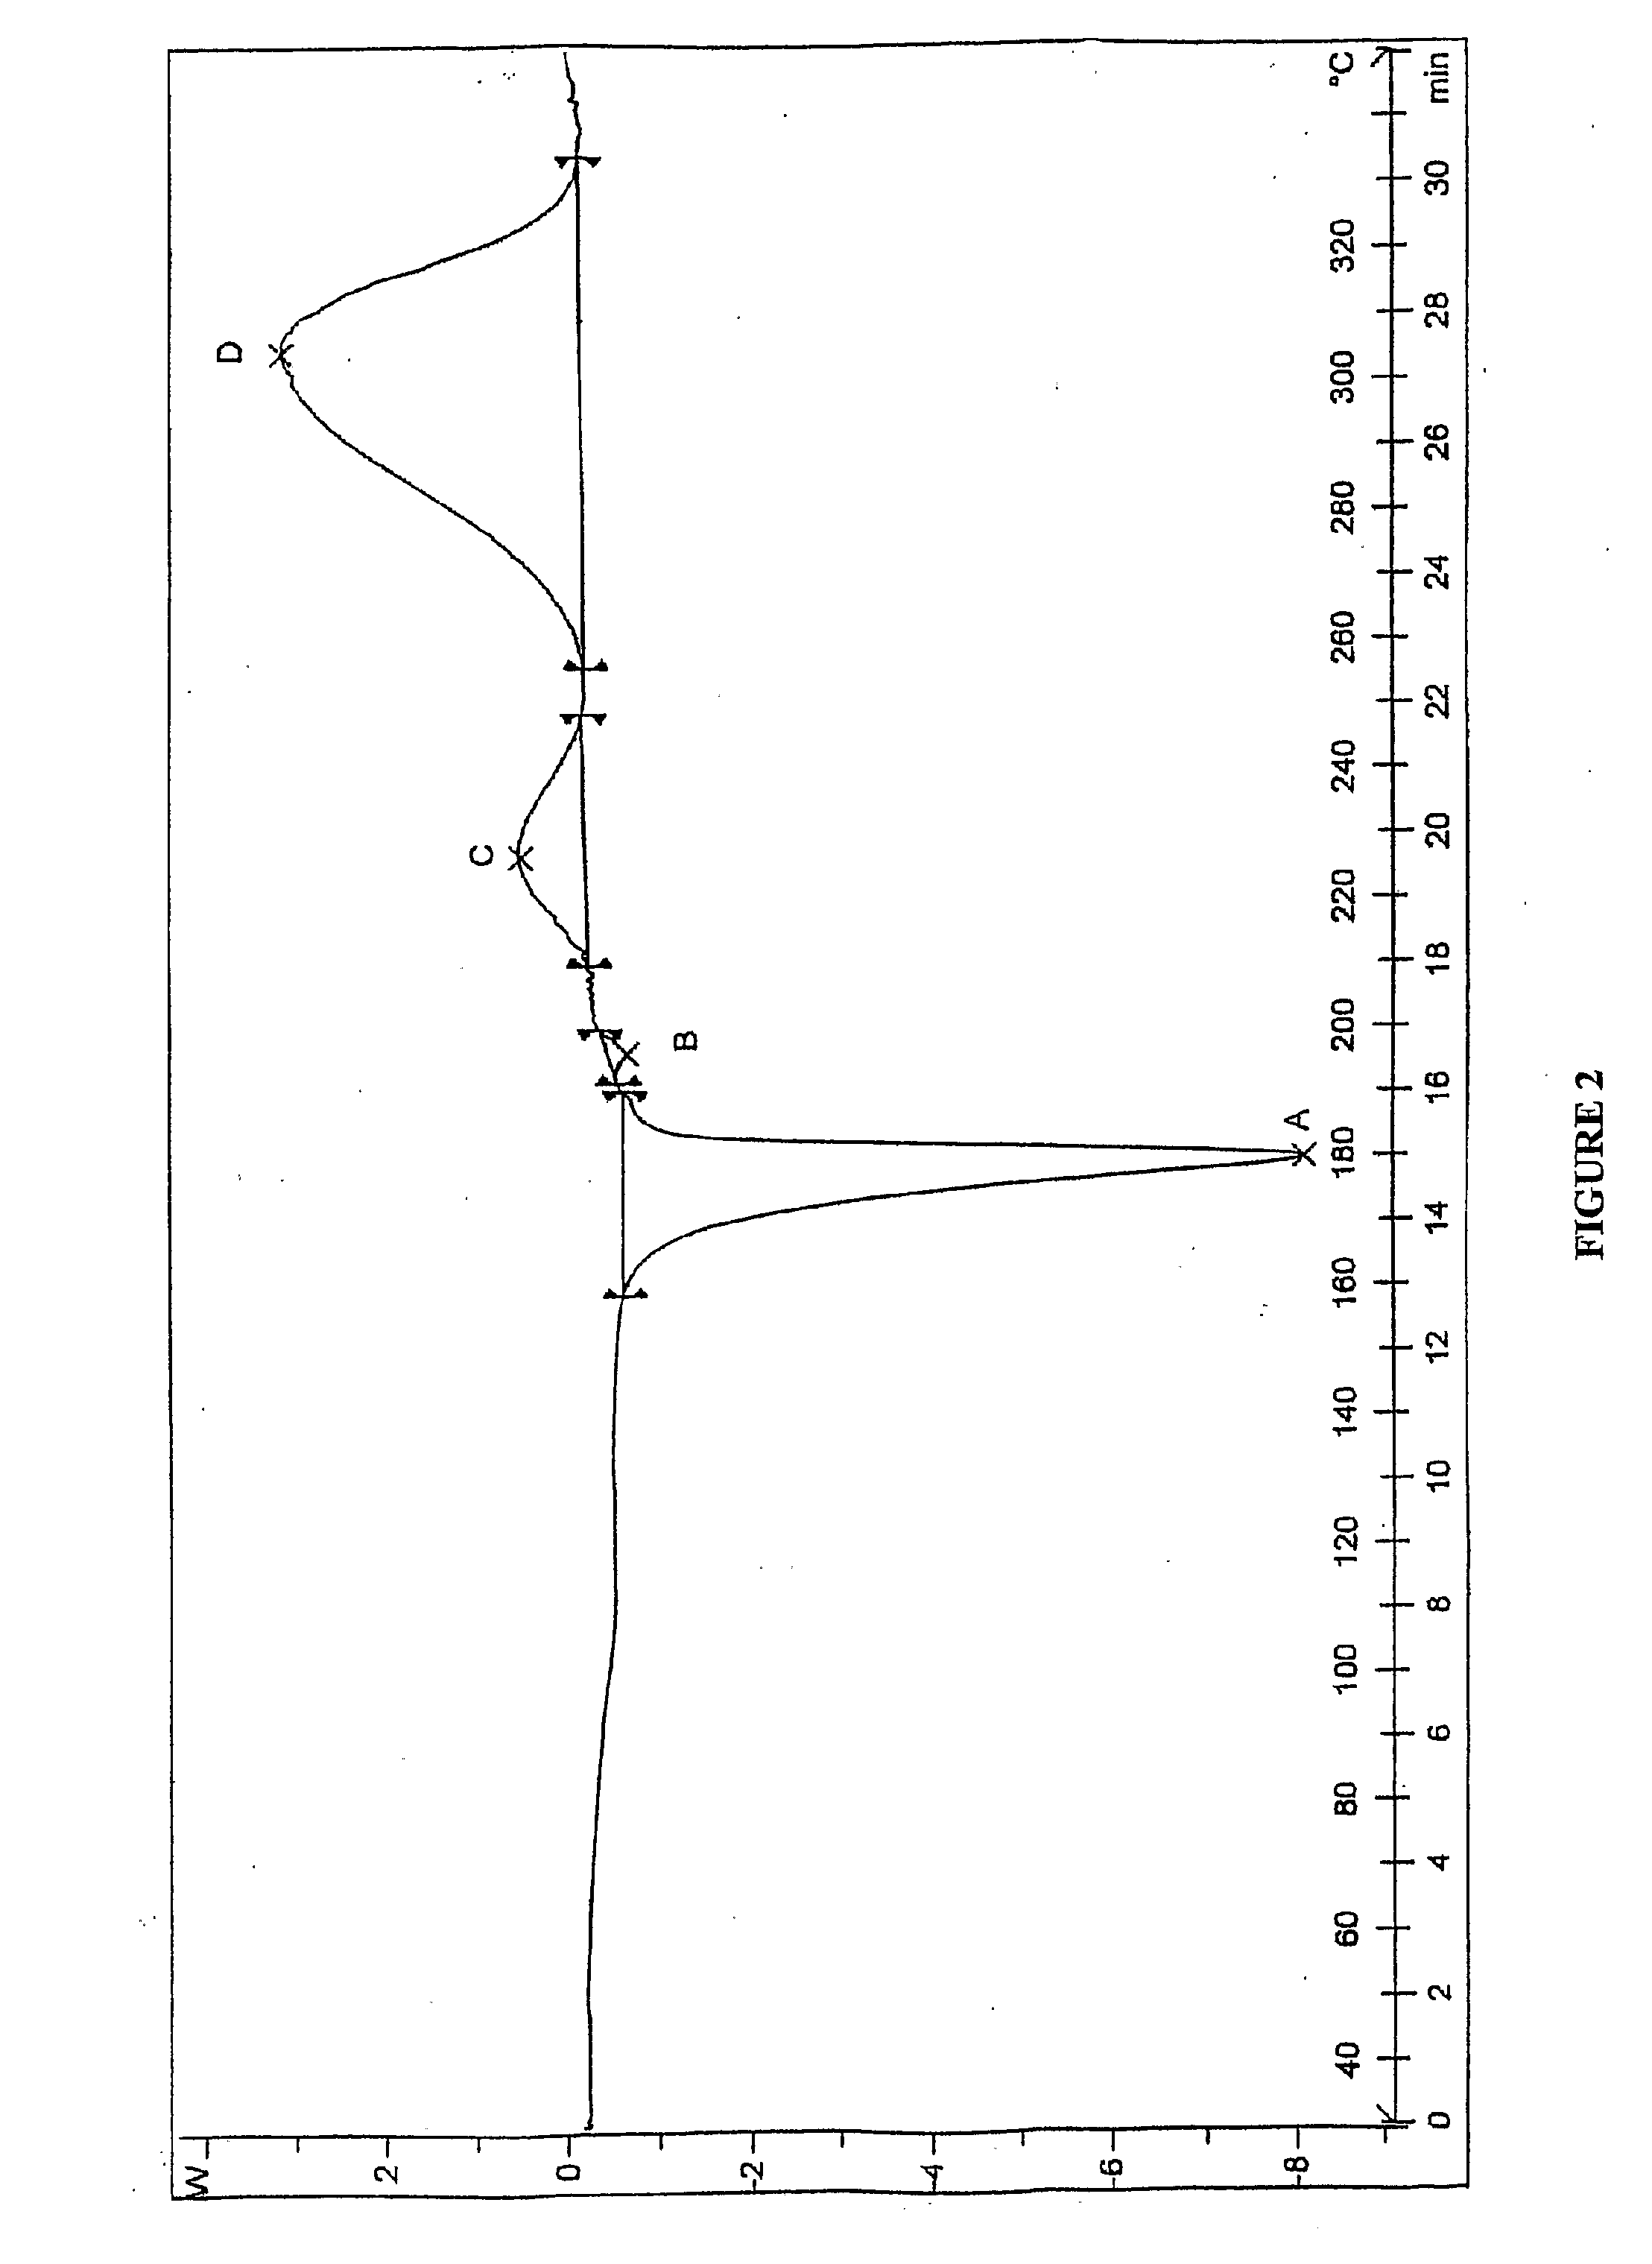 Polymorphic Form of Lercanidipine Hydrochloride and Process for the Preparation Thereof